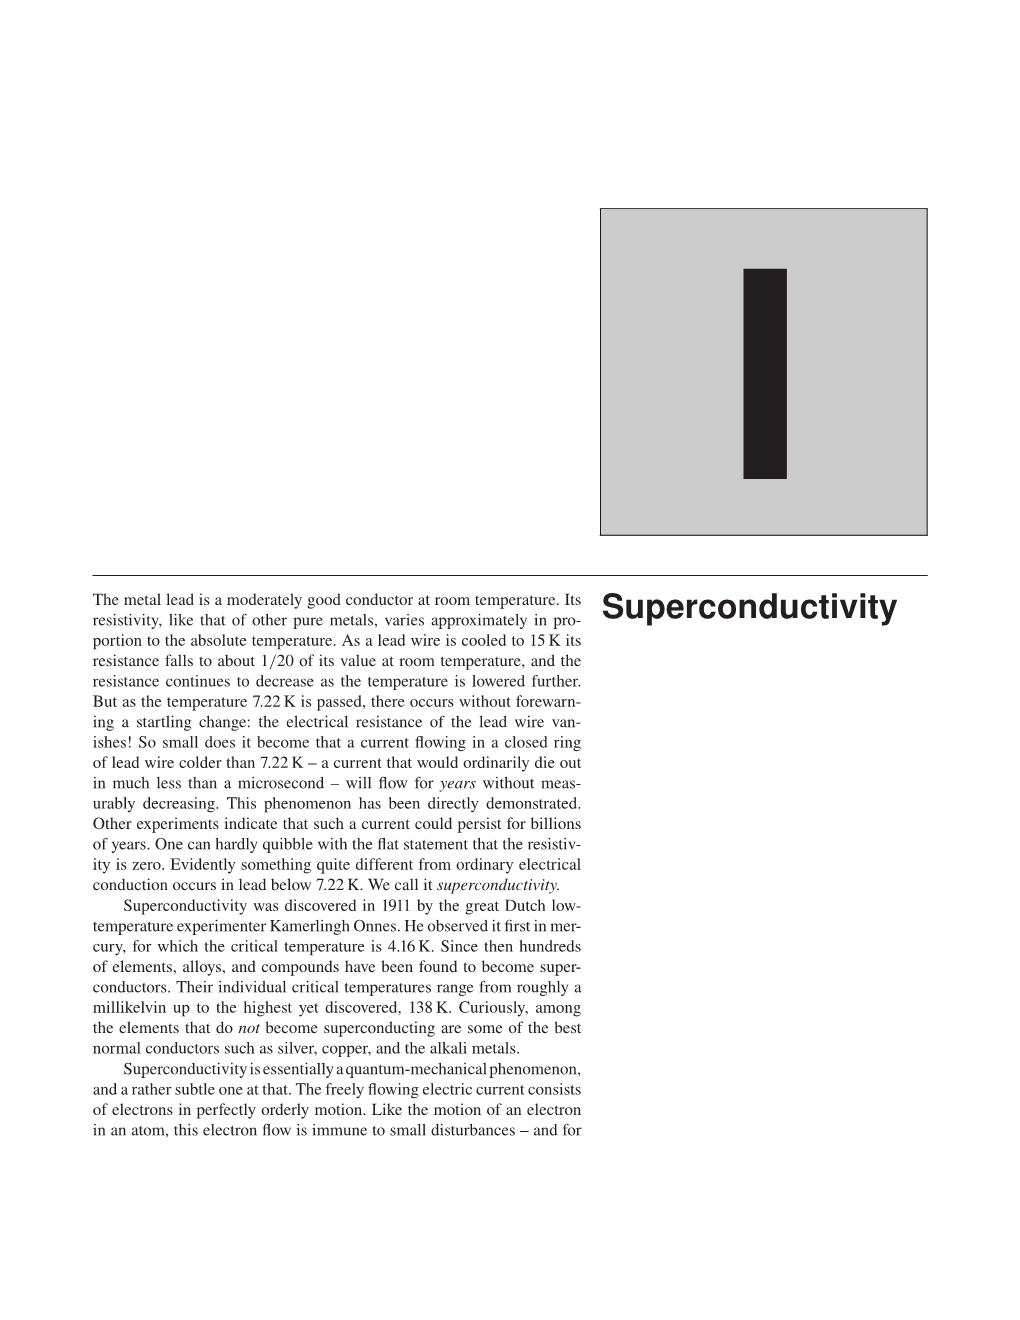 Superconductivity Portion to the Absolute Temperature